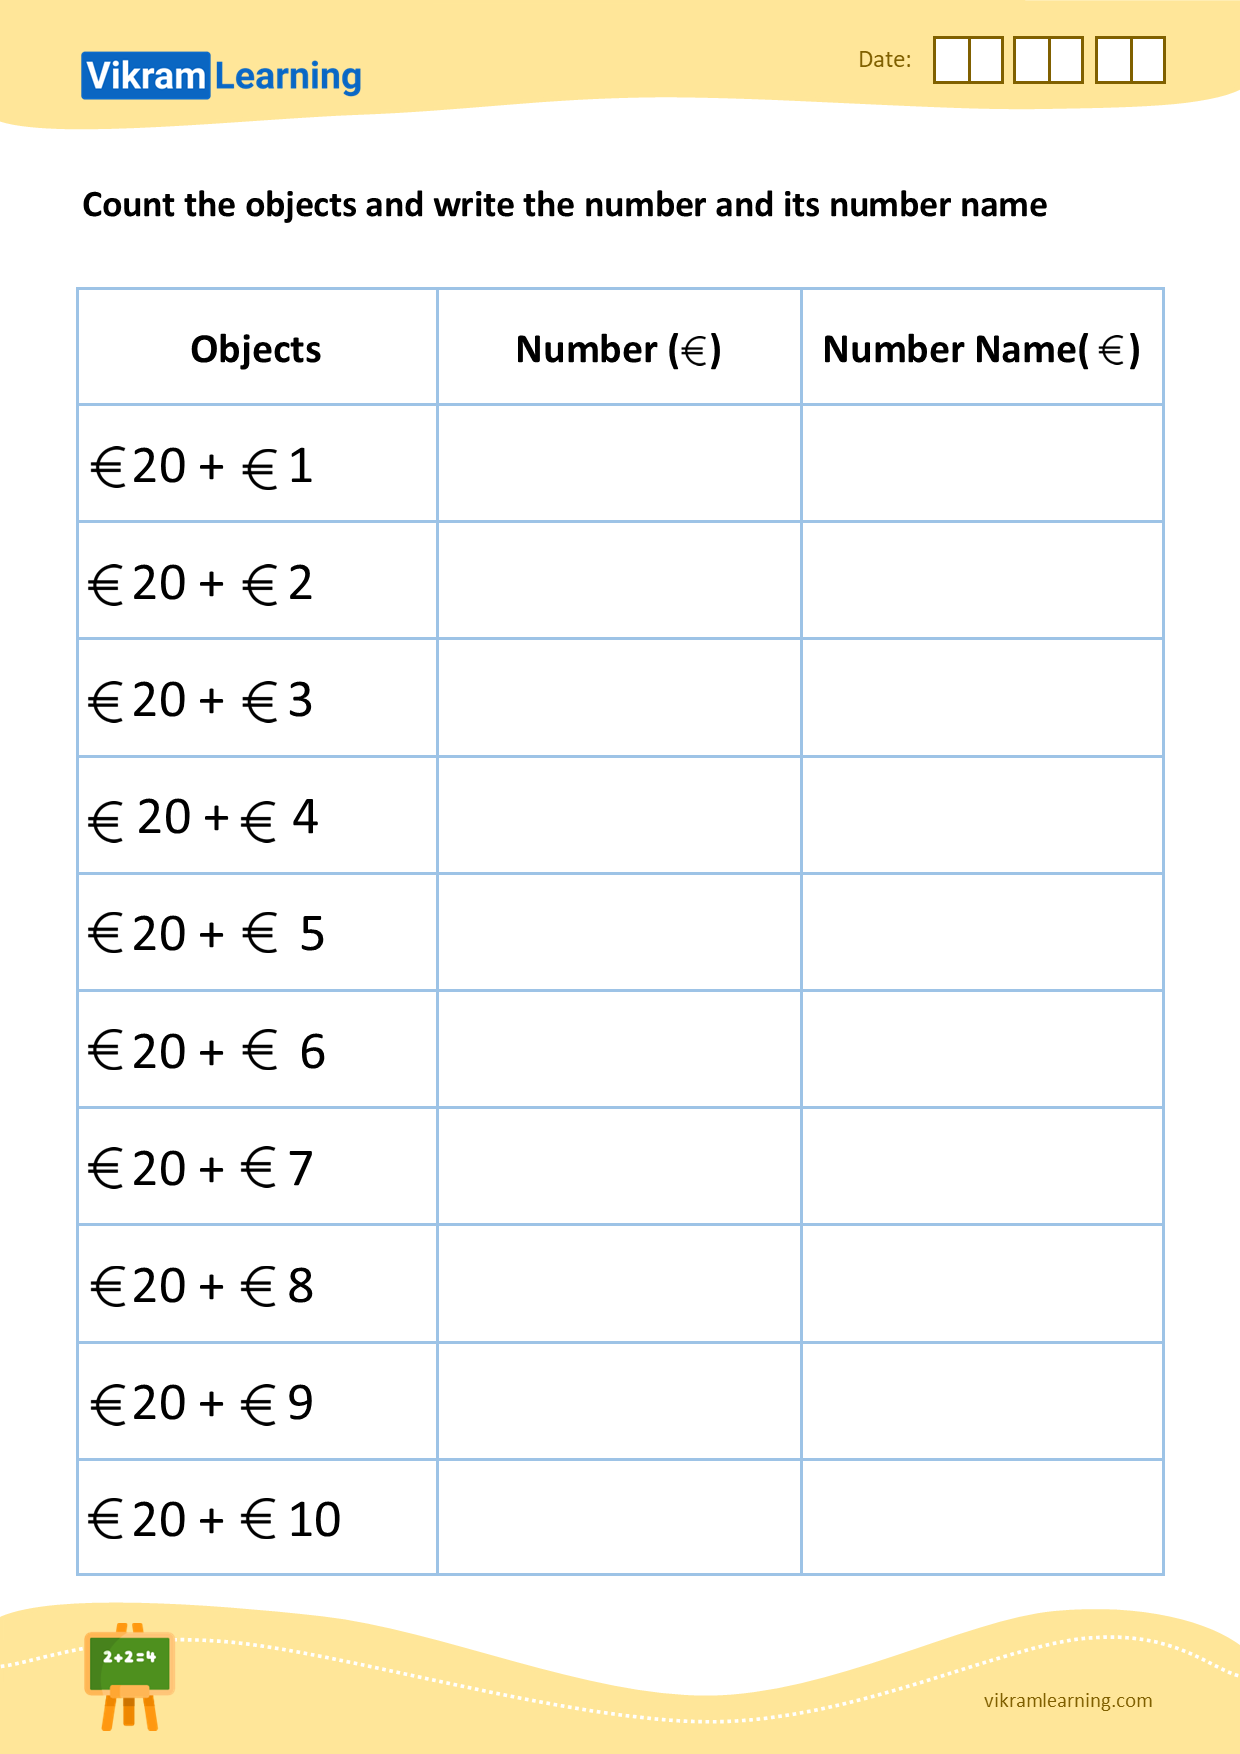 Download count the objects and write the number and its number name (21 to 30) - pattern 4 worksheets